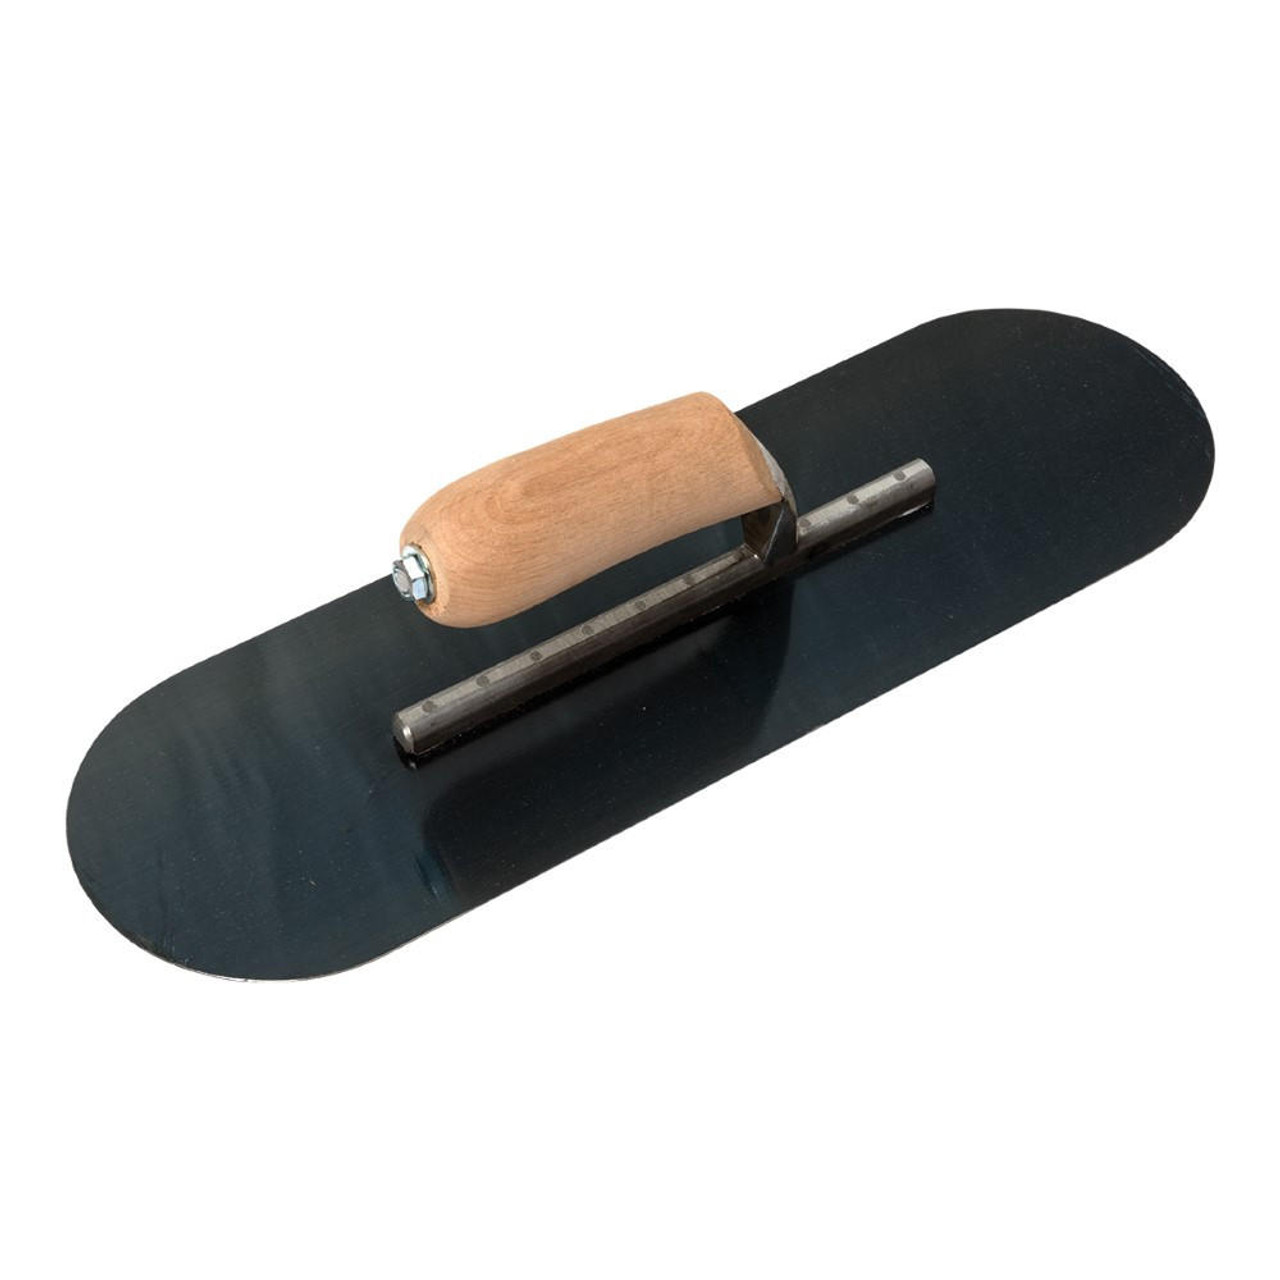 12 inch Magic Trowel Smoother